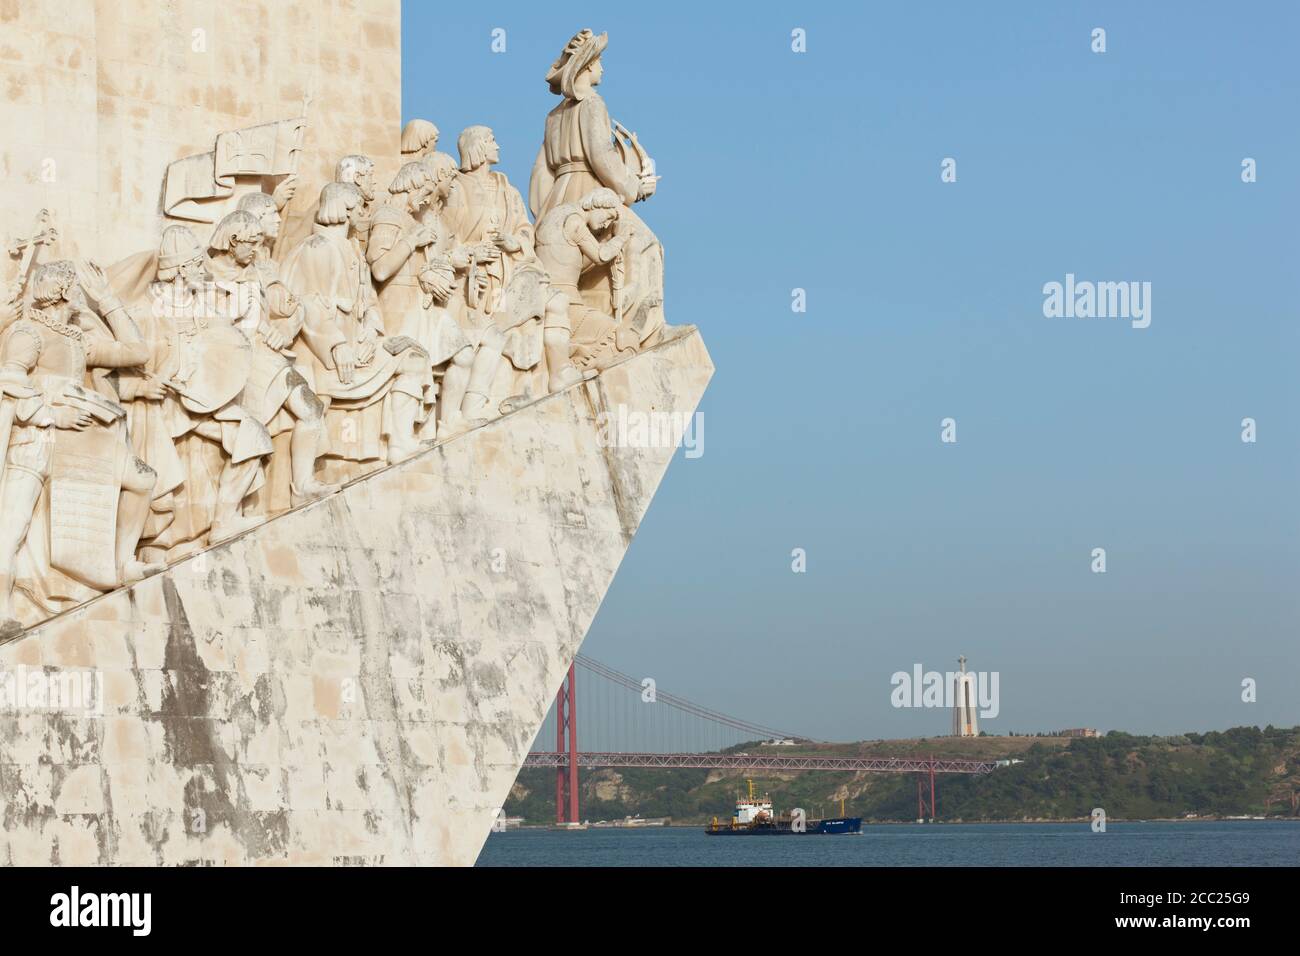 Europe, Portugal, Lisbon, Belem, Padrao dos Descobrimentos, View of monumental sculpture of Portuguese seafaring near river Tagus Stock Photo